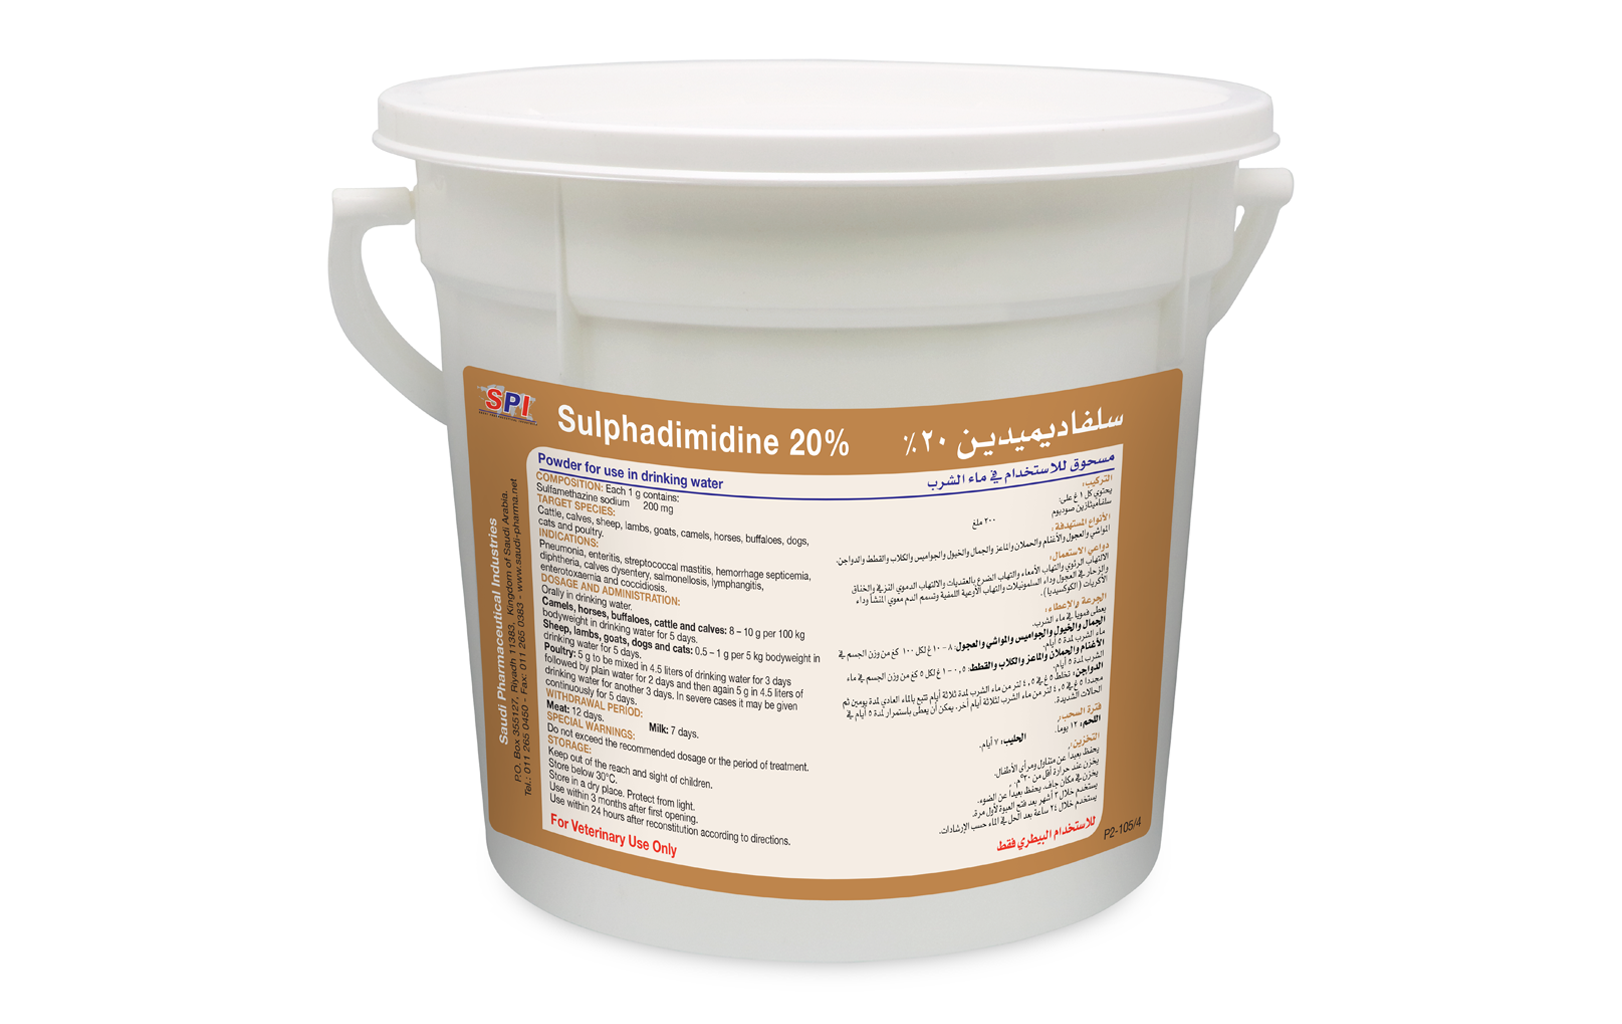 Sulphadimidine 20% Powder for Use in Drinking Water (1 kg)